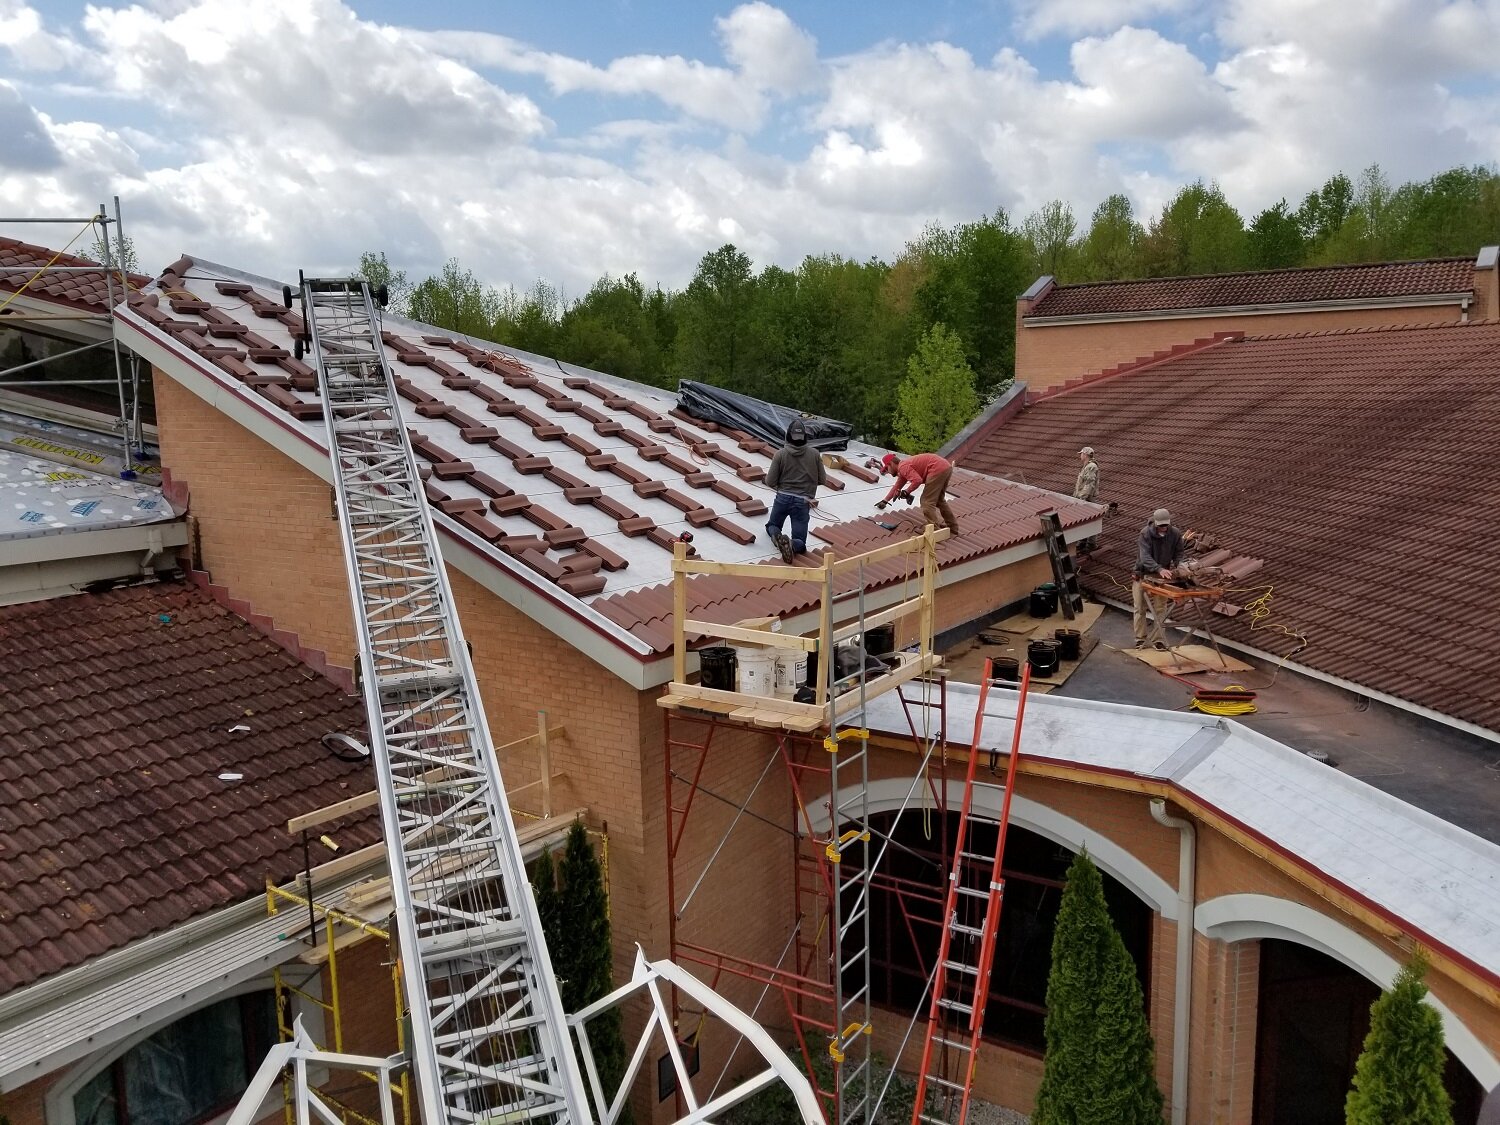  April 22 - work on the chapel roof is progressing 